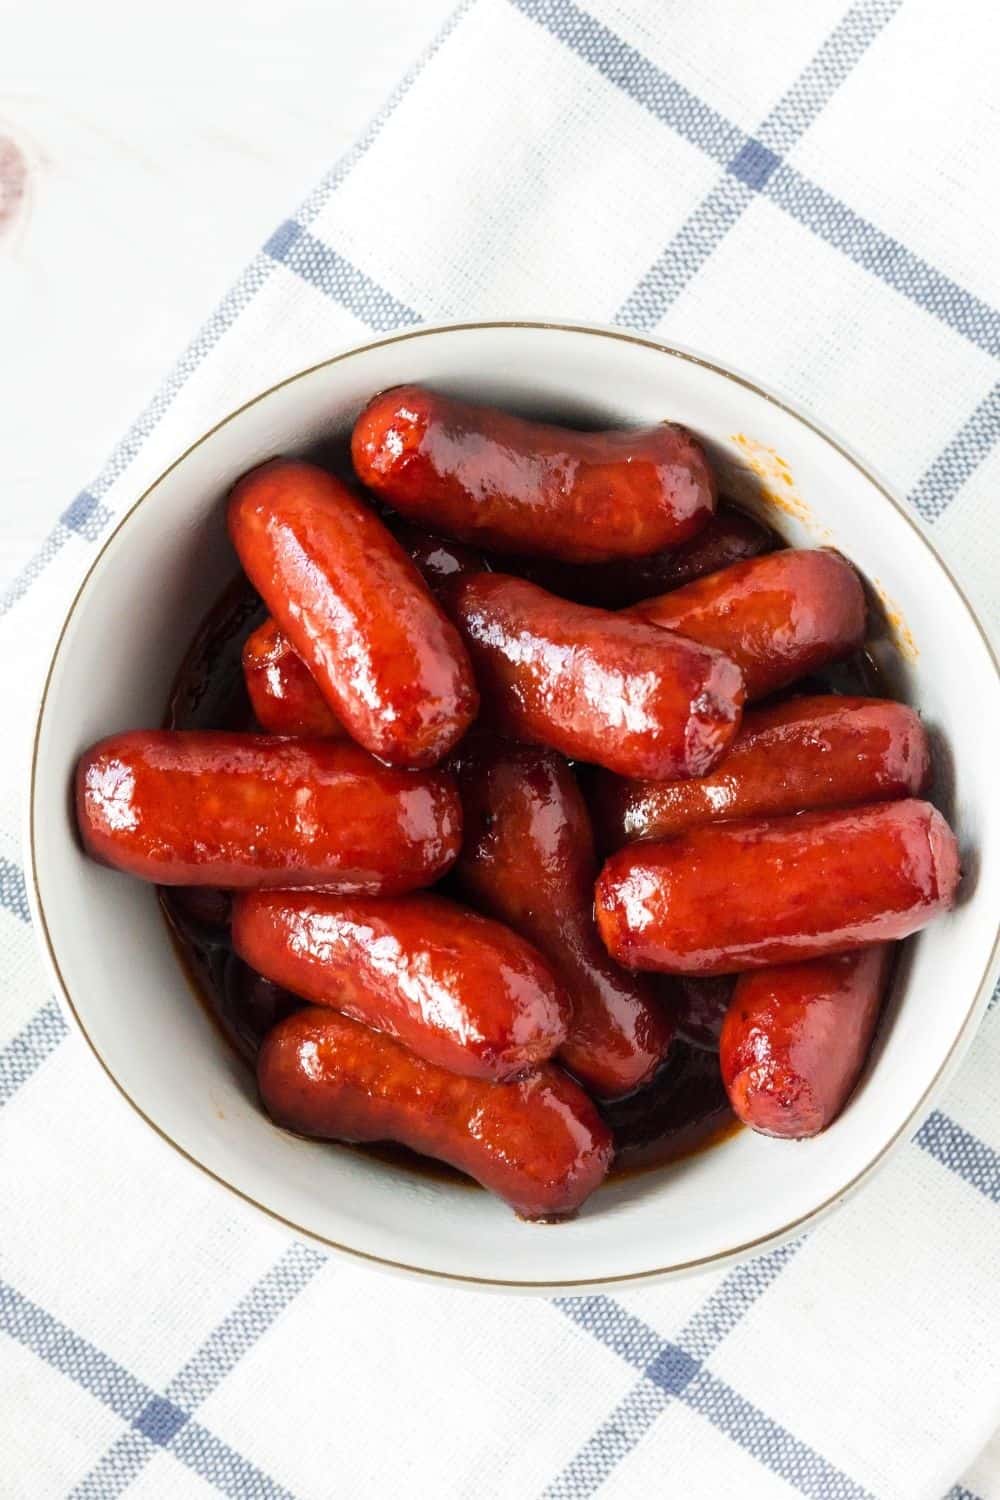 Instant Pot little smokies in bbq grape jelly sauce, served in a white bowl atop a blue and white checked napkin